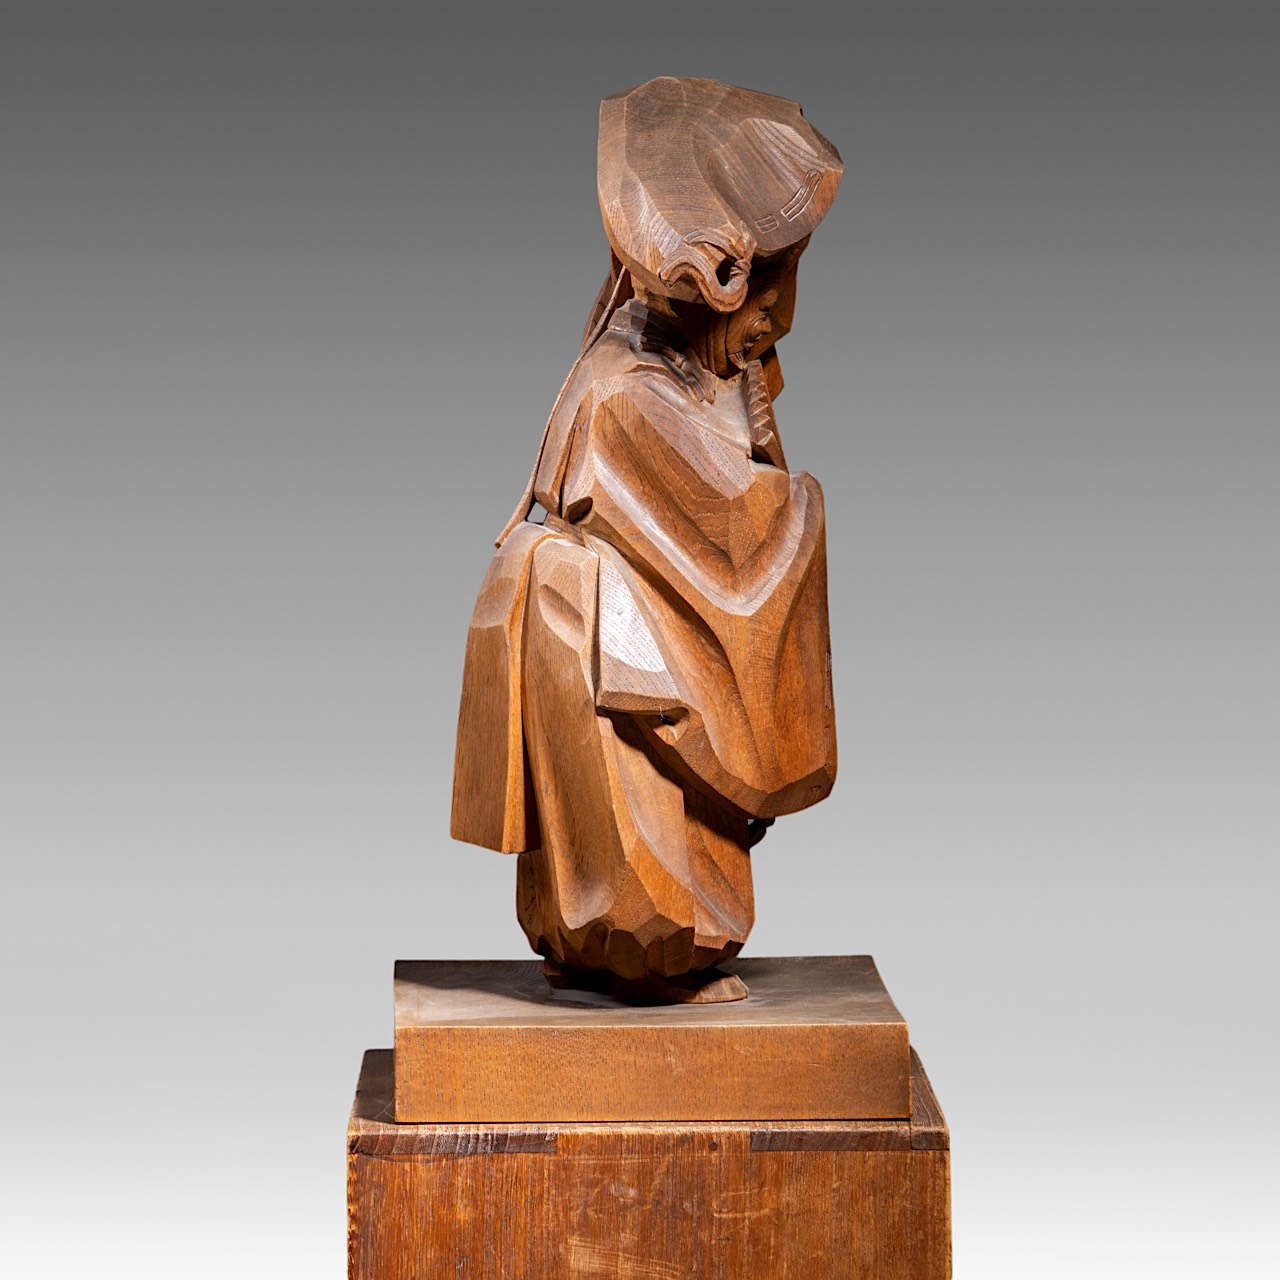 A Japanese cherrywood sculpture of a dancing man, signed Toshiaki Shimamura, total H 47 - 25,5 x 23 - Image 5 of 10